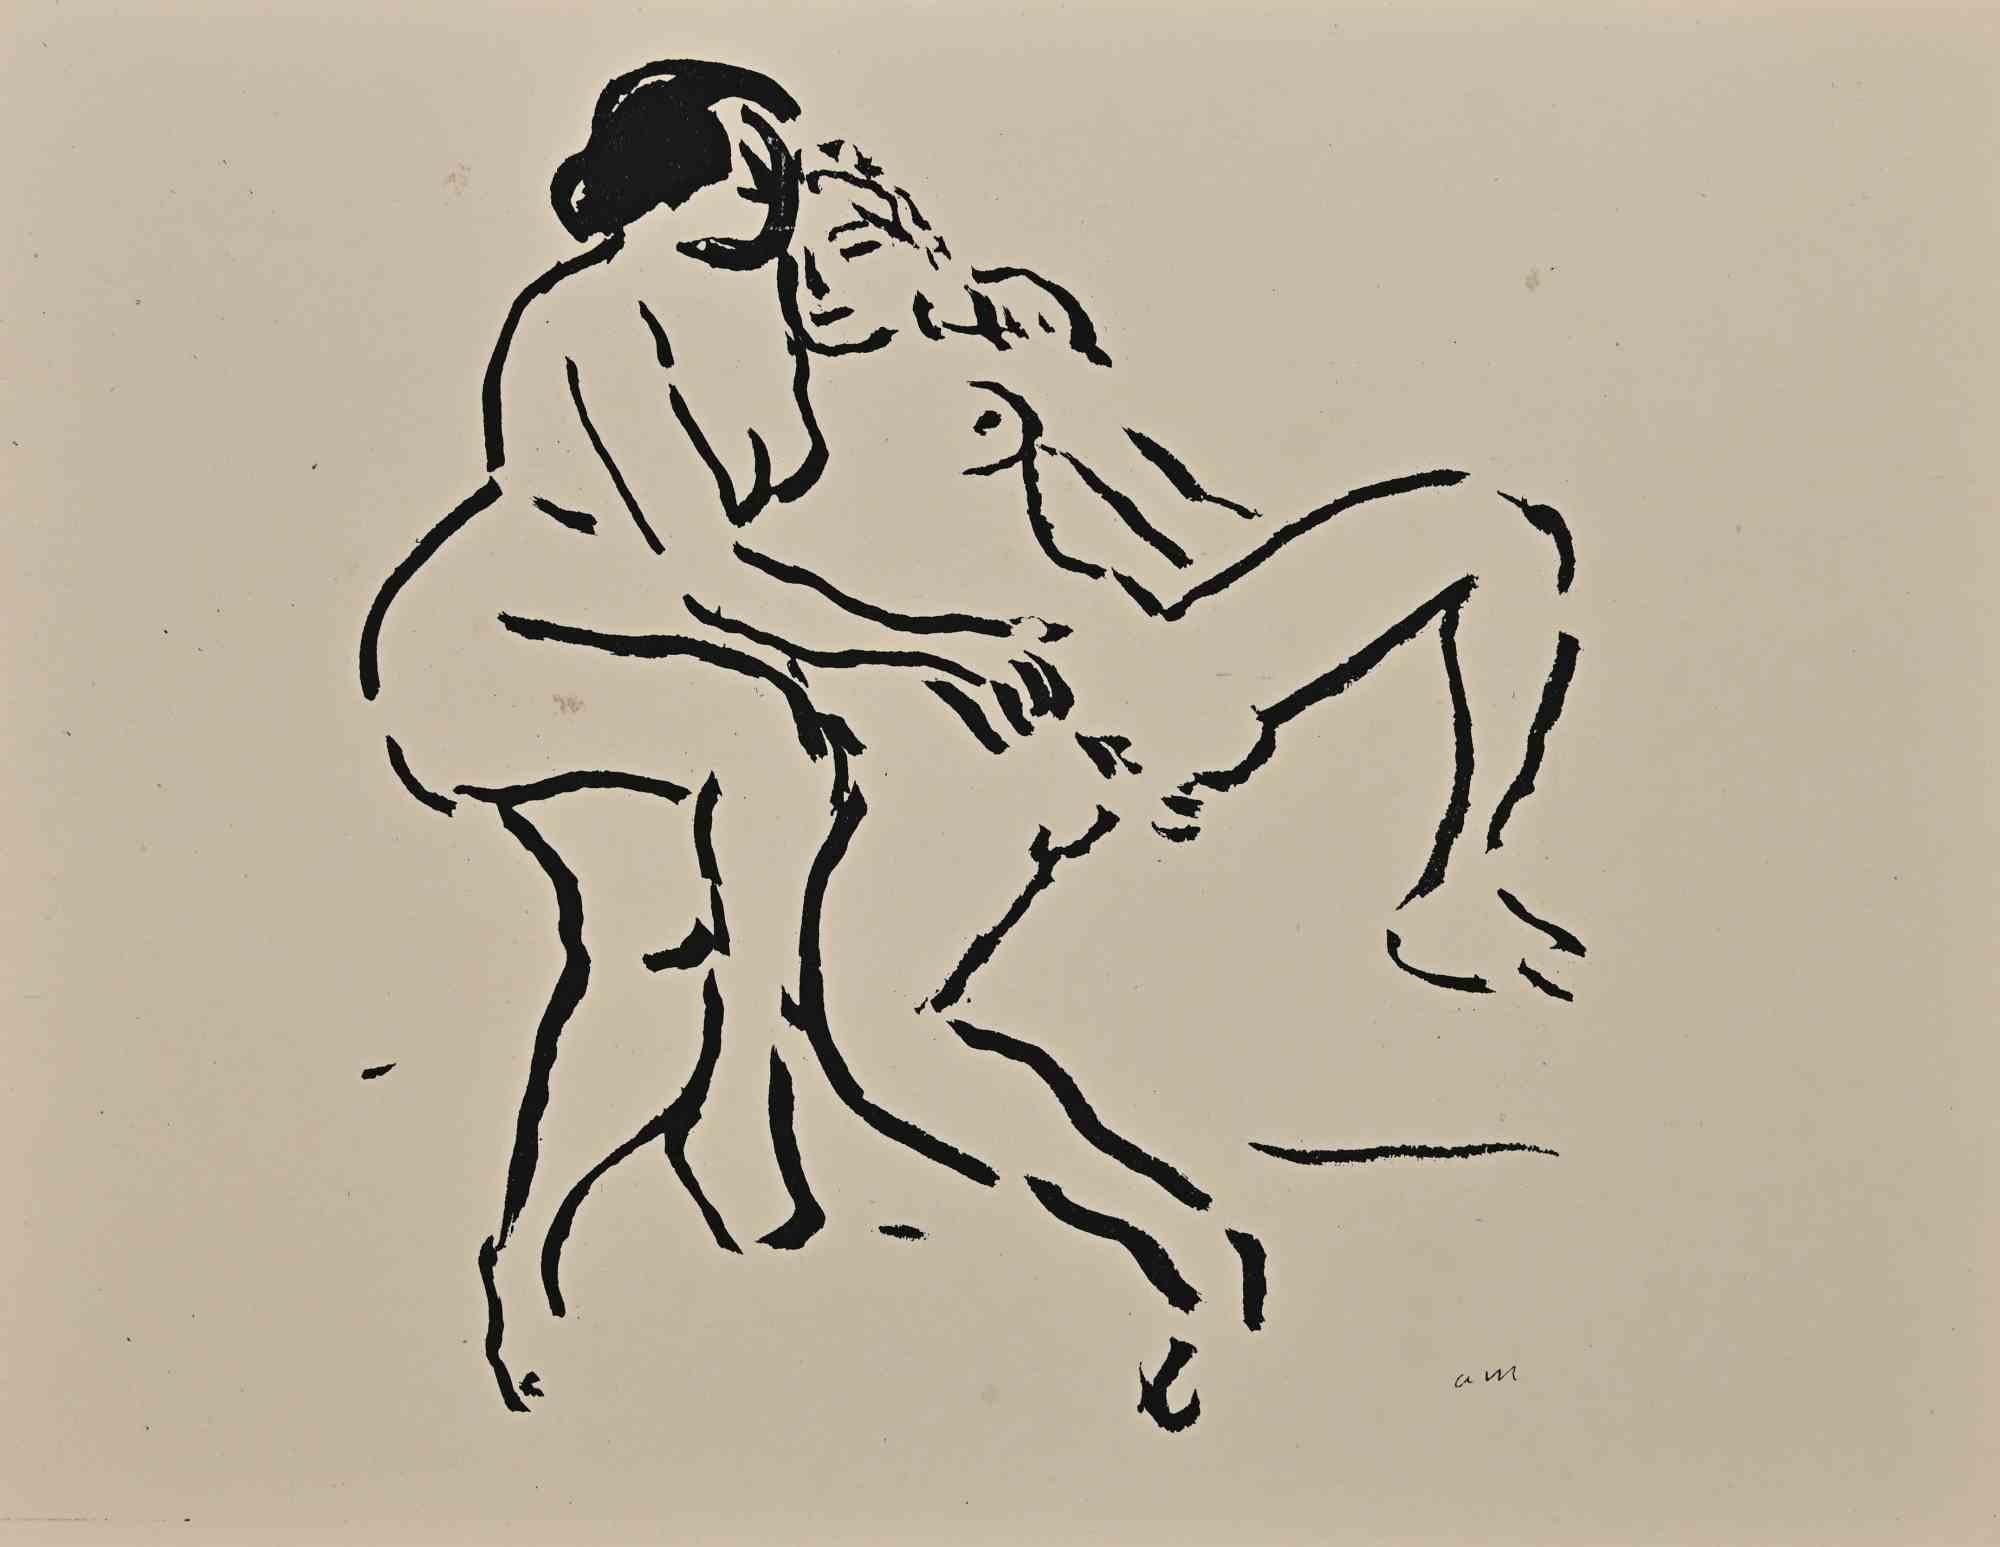 Erotic Scene - Lithograph by Albert Marquet - 1920s